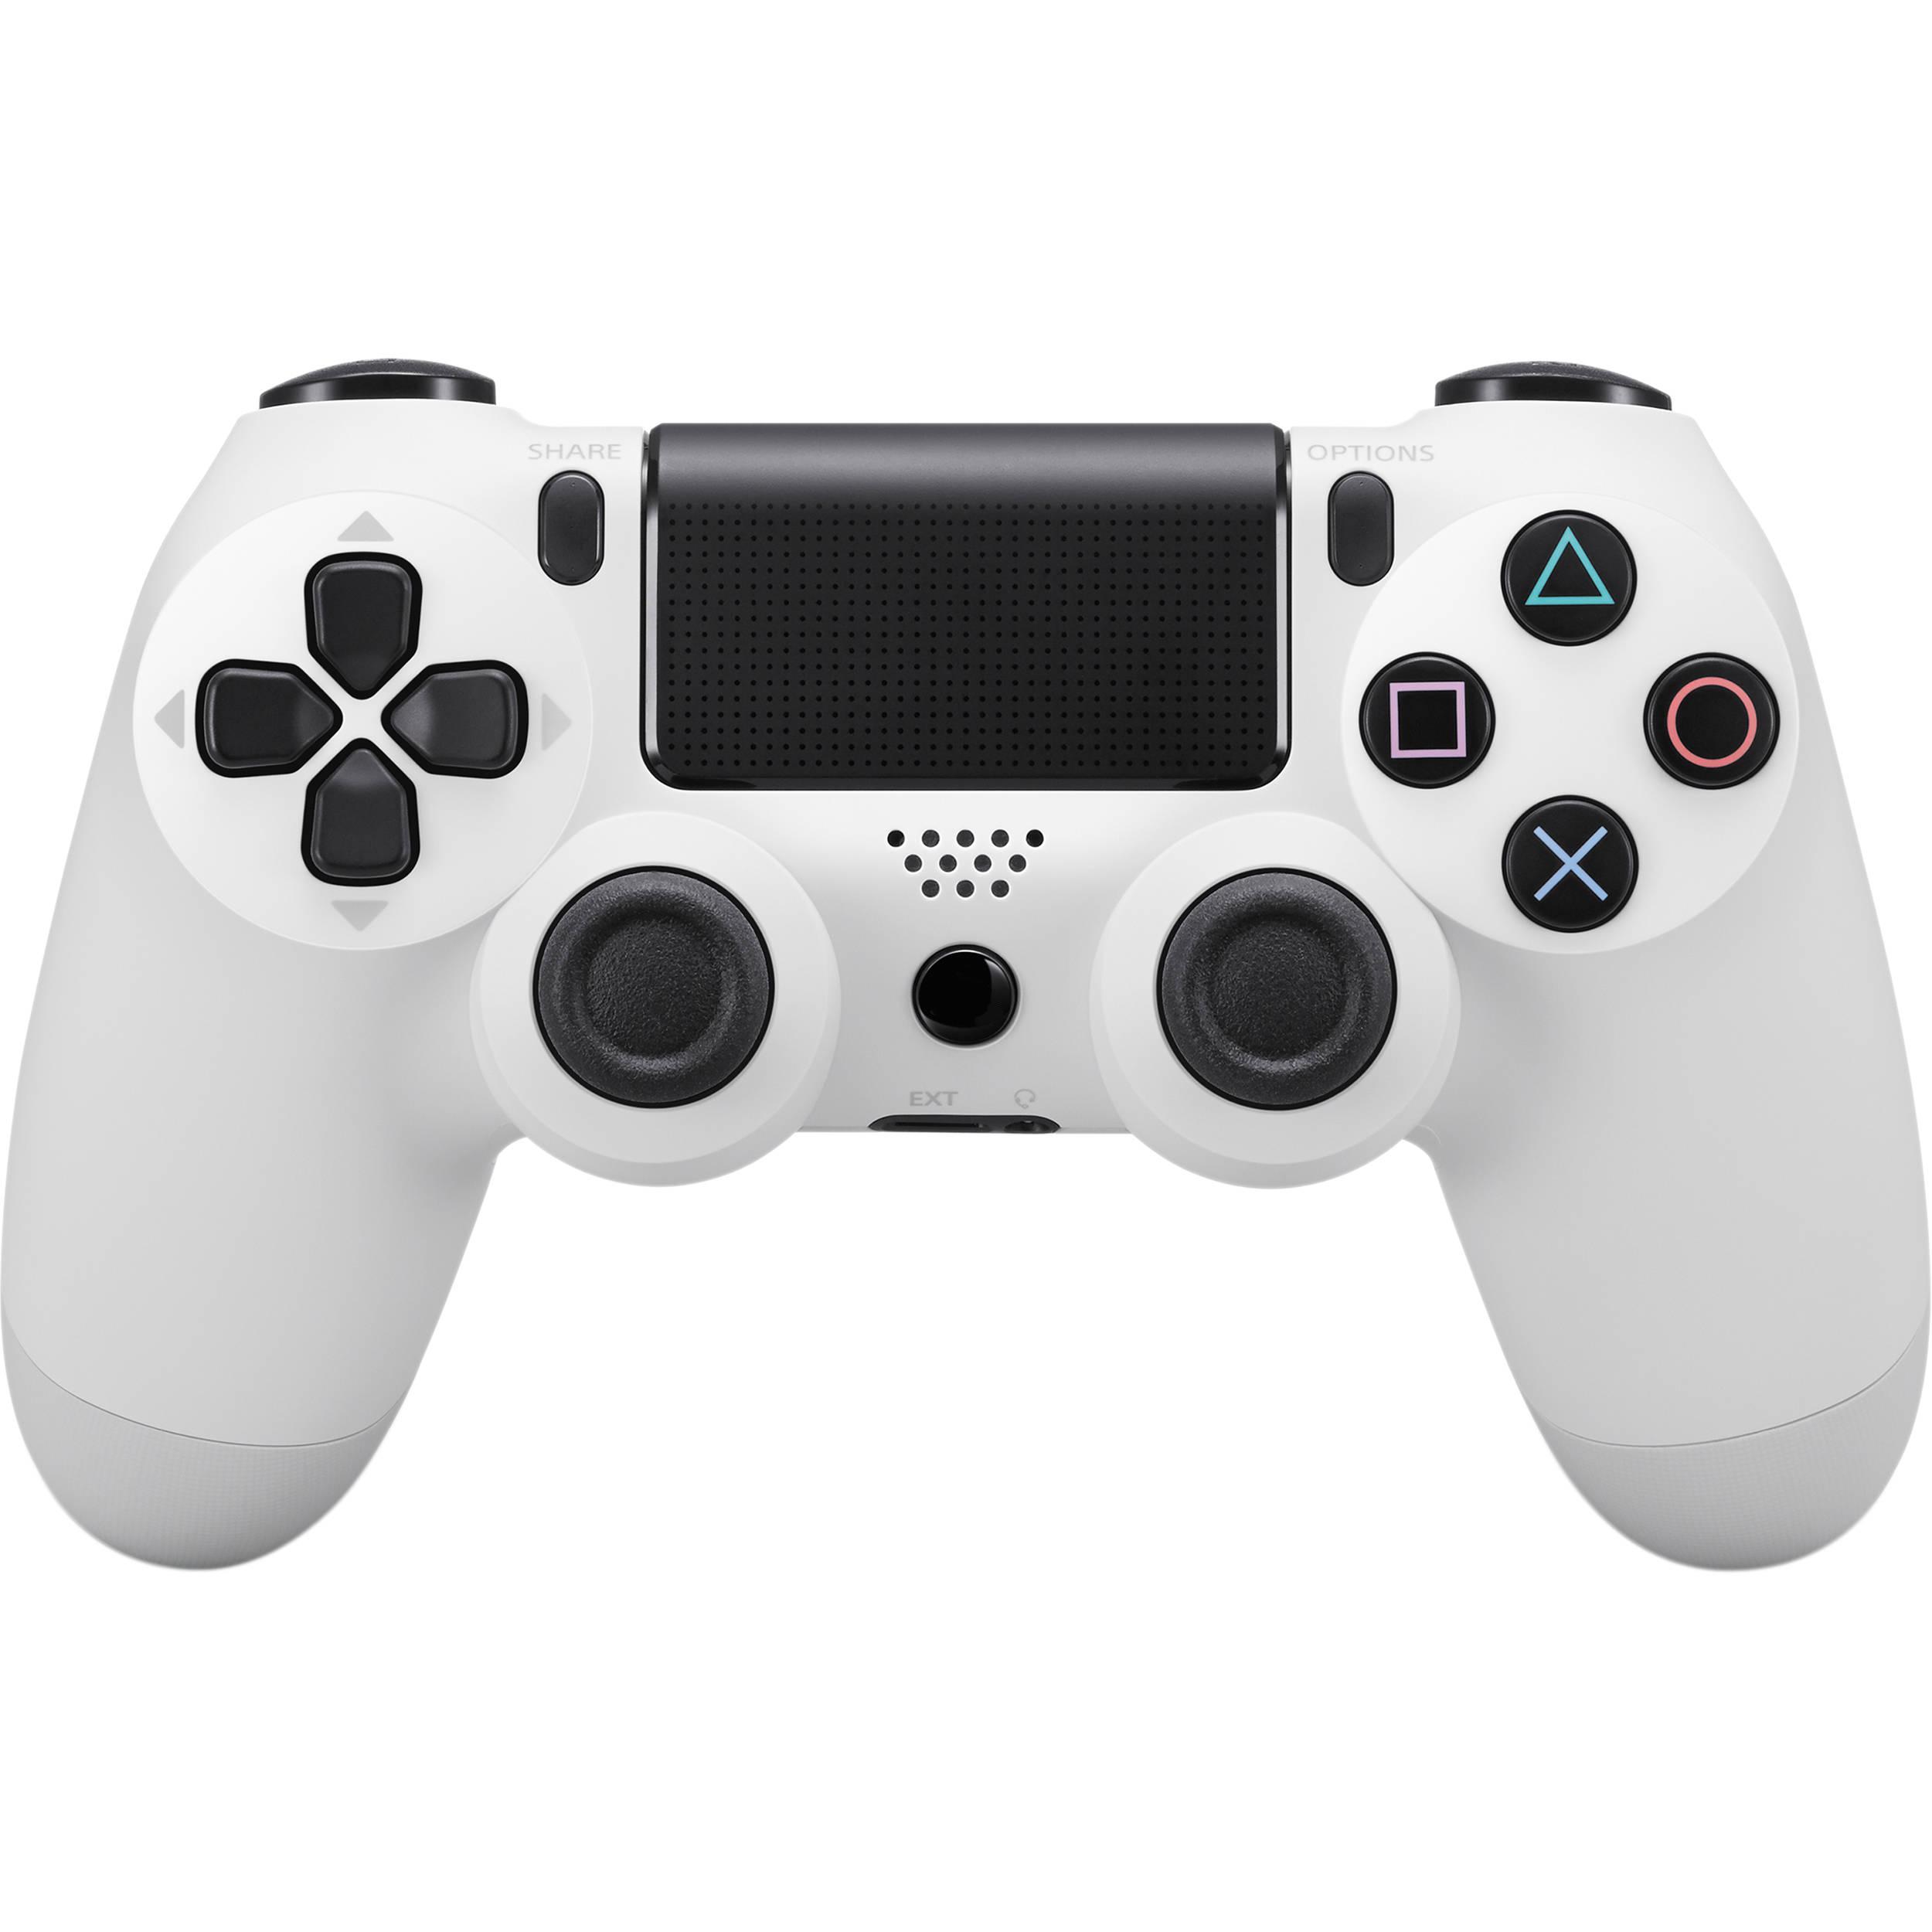 PS4 Controller 4 - Wired Wit - Third Party (PS4) kopen - €39.99